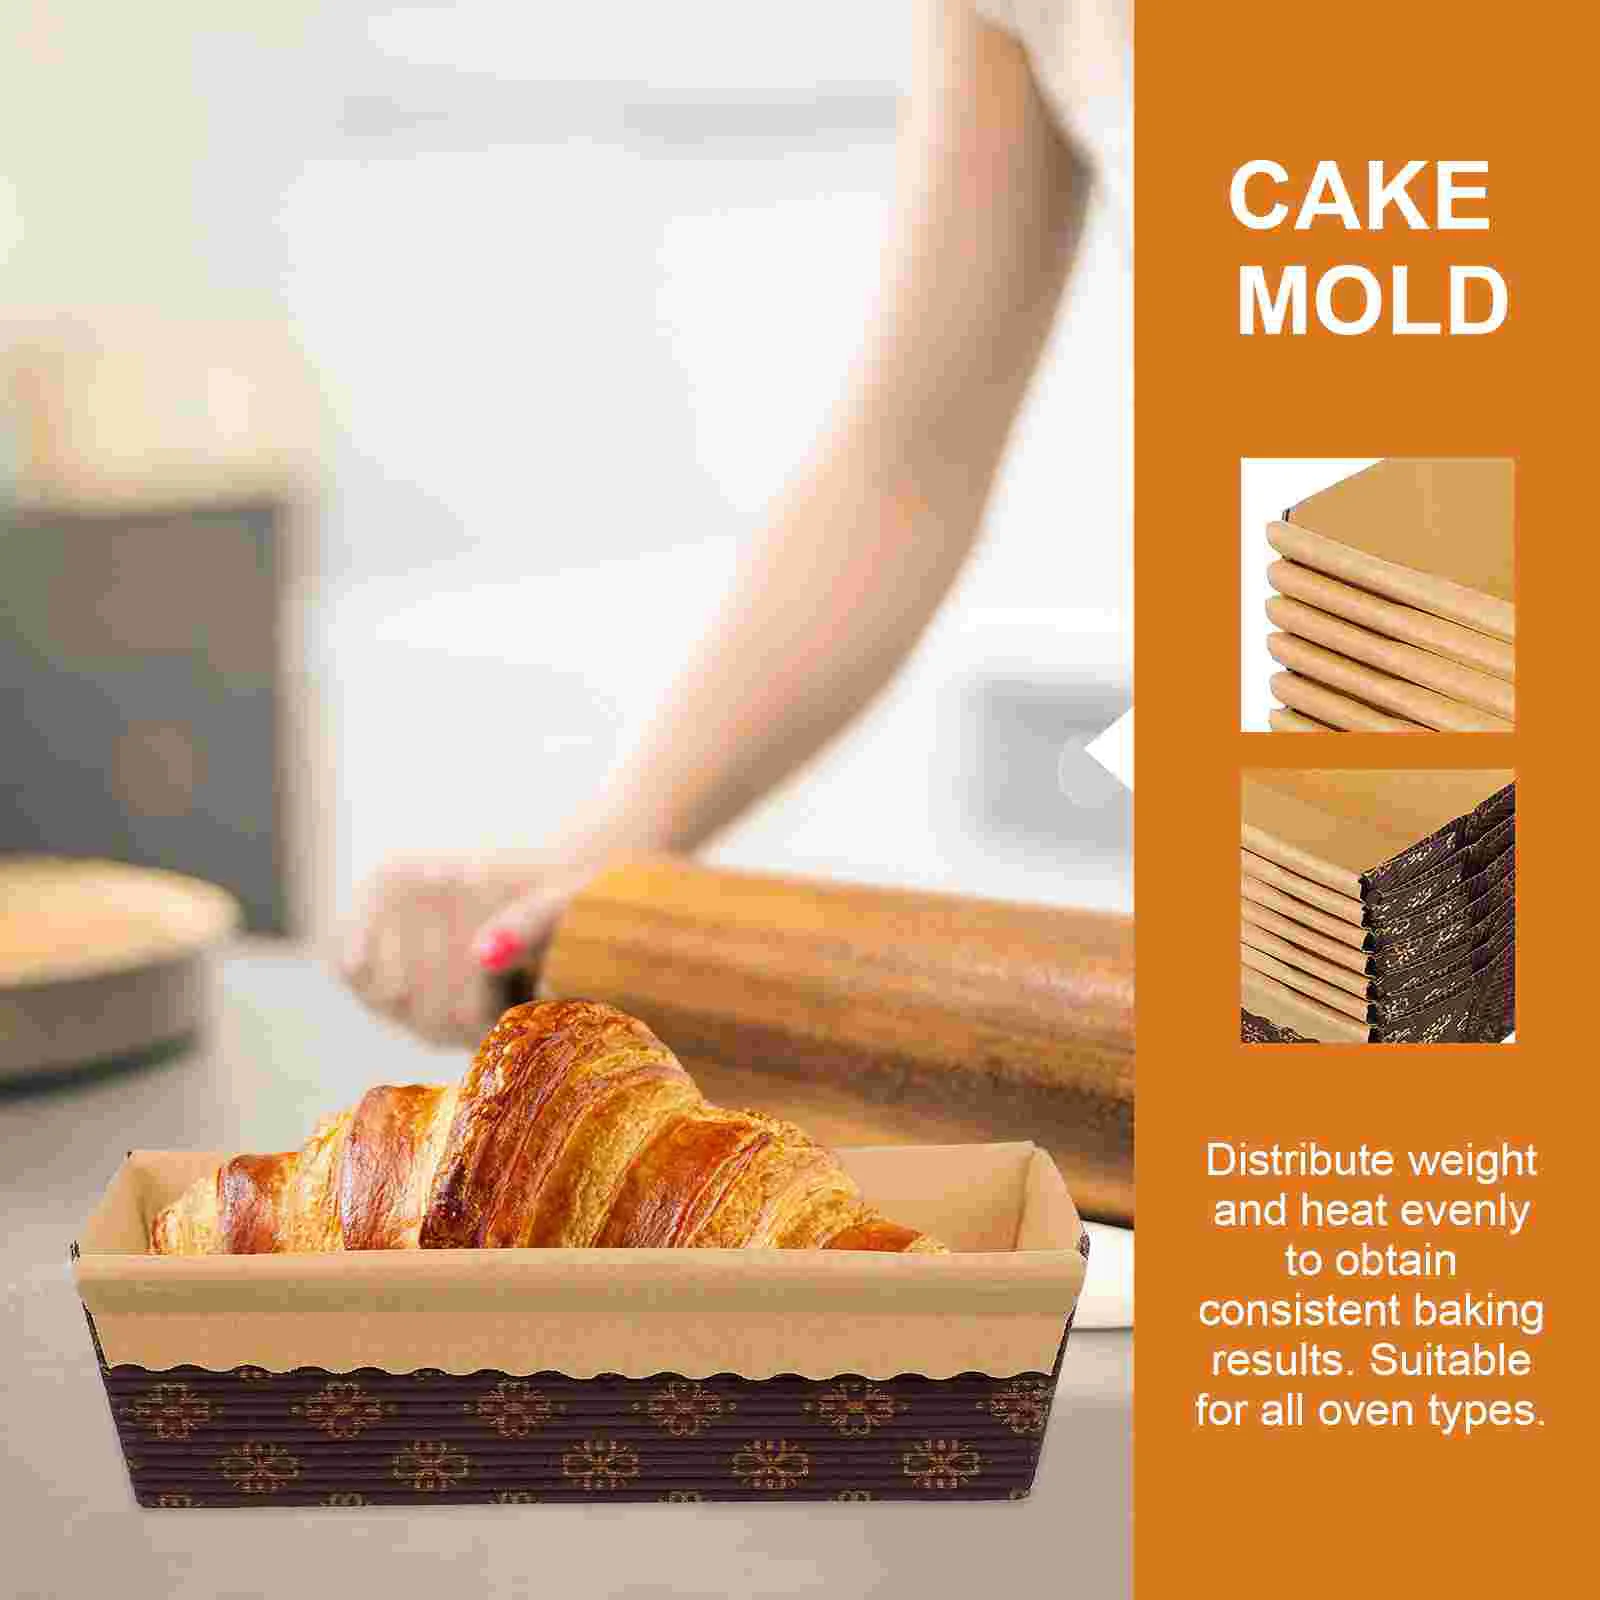 50pcs Baking Pans Paper Pan Loaf Bread Mold Toast Disposable Cakes